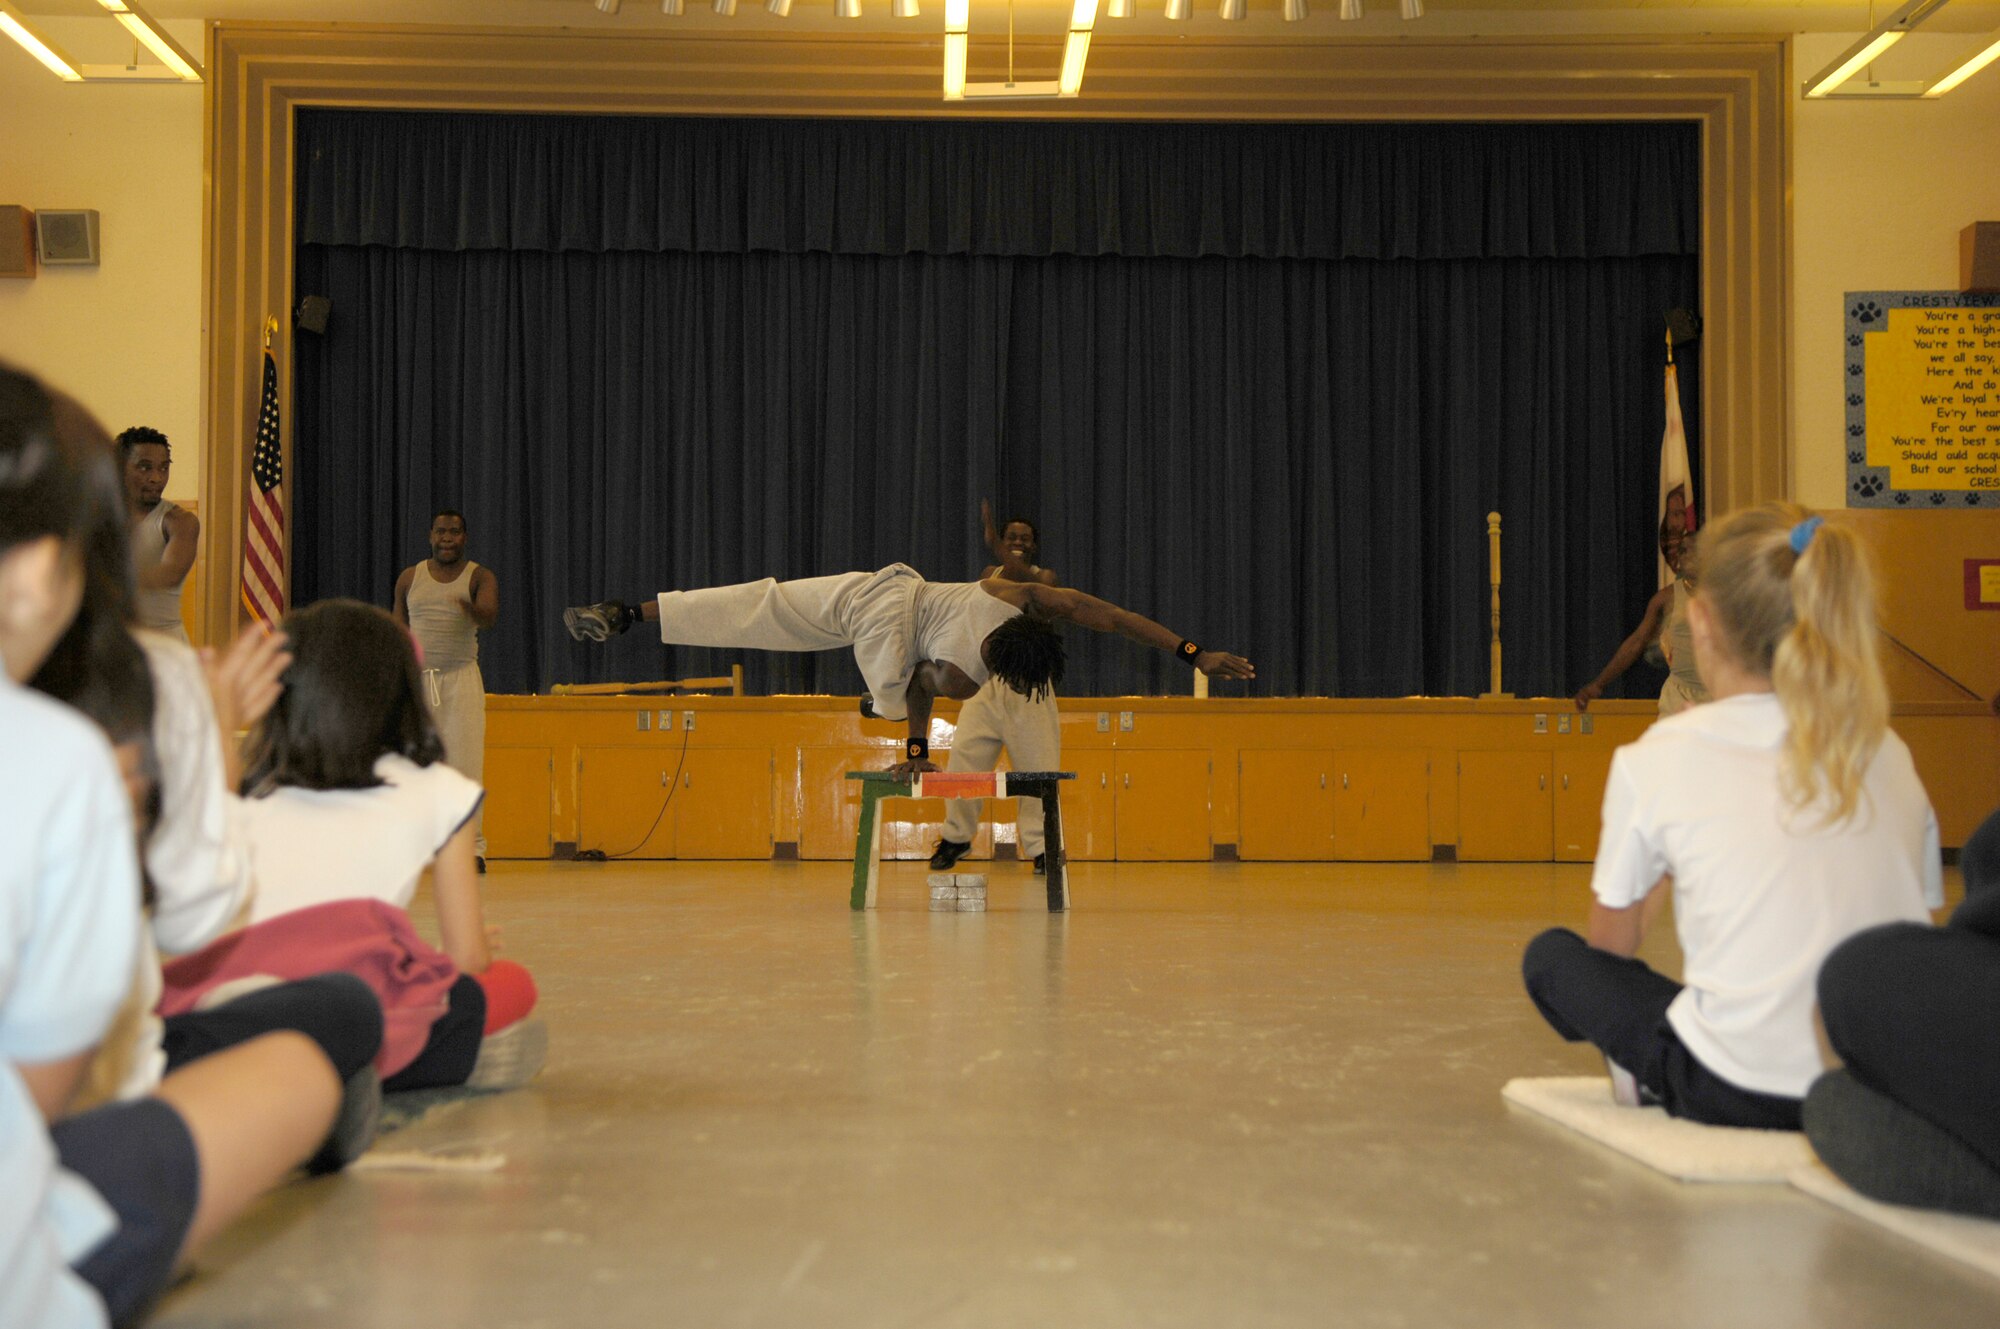 VANDENBERG AIR FORCE BASE, Calif. -- Amos Mwadzoya performs a one handed acrobatic balancing act during a show for kids at Crestview Elementary on Nov. 8.  Famous Africa Acrobats LLC., travels nationwide and their performances include the limbo, jump roping, summersaults, and human pyramids. (U.S. Air Force photo/Airman 1st Class Cole Presley)